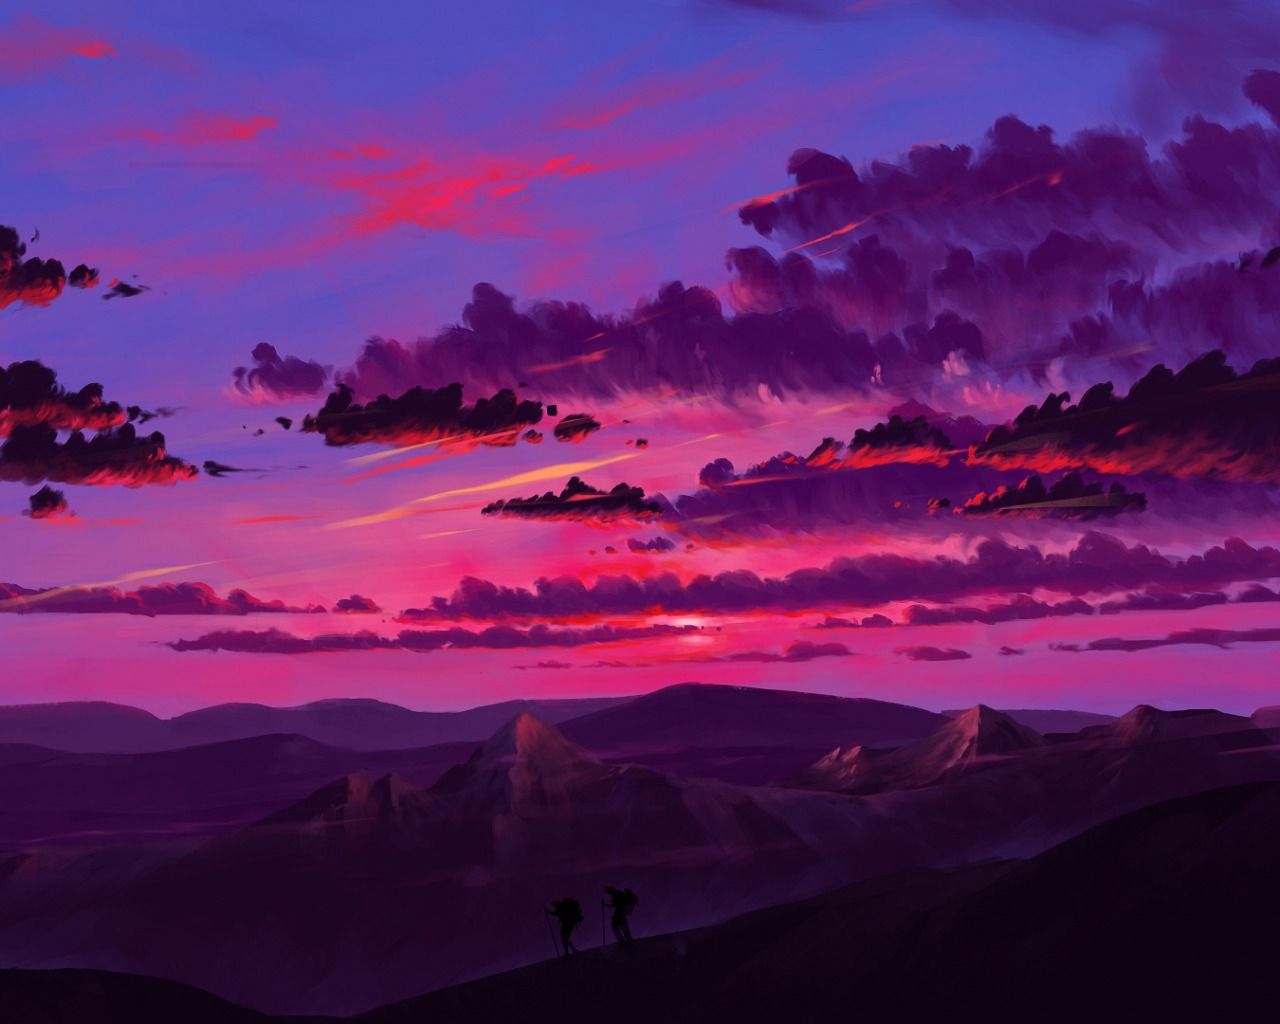 A breathtaking sunset over the mountains with silhouetted figures of two people trekking. The sky is painted in shades of pink, purple, and blue with fluffy clouds. - 1280x1024